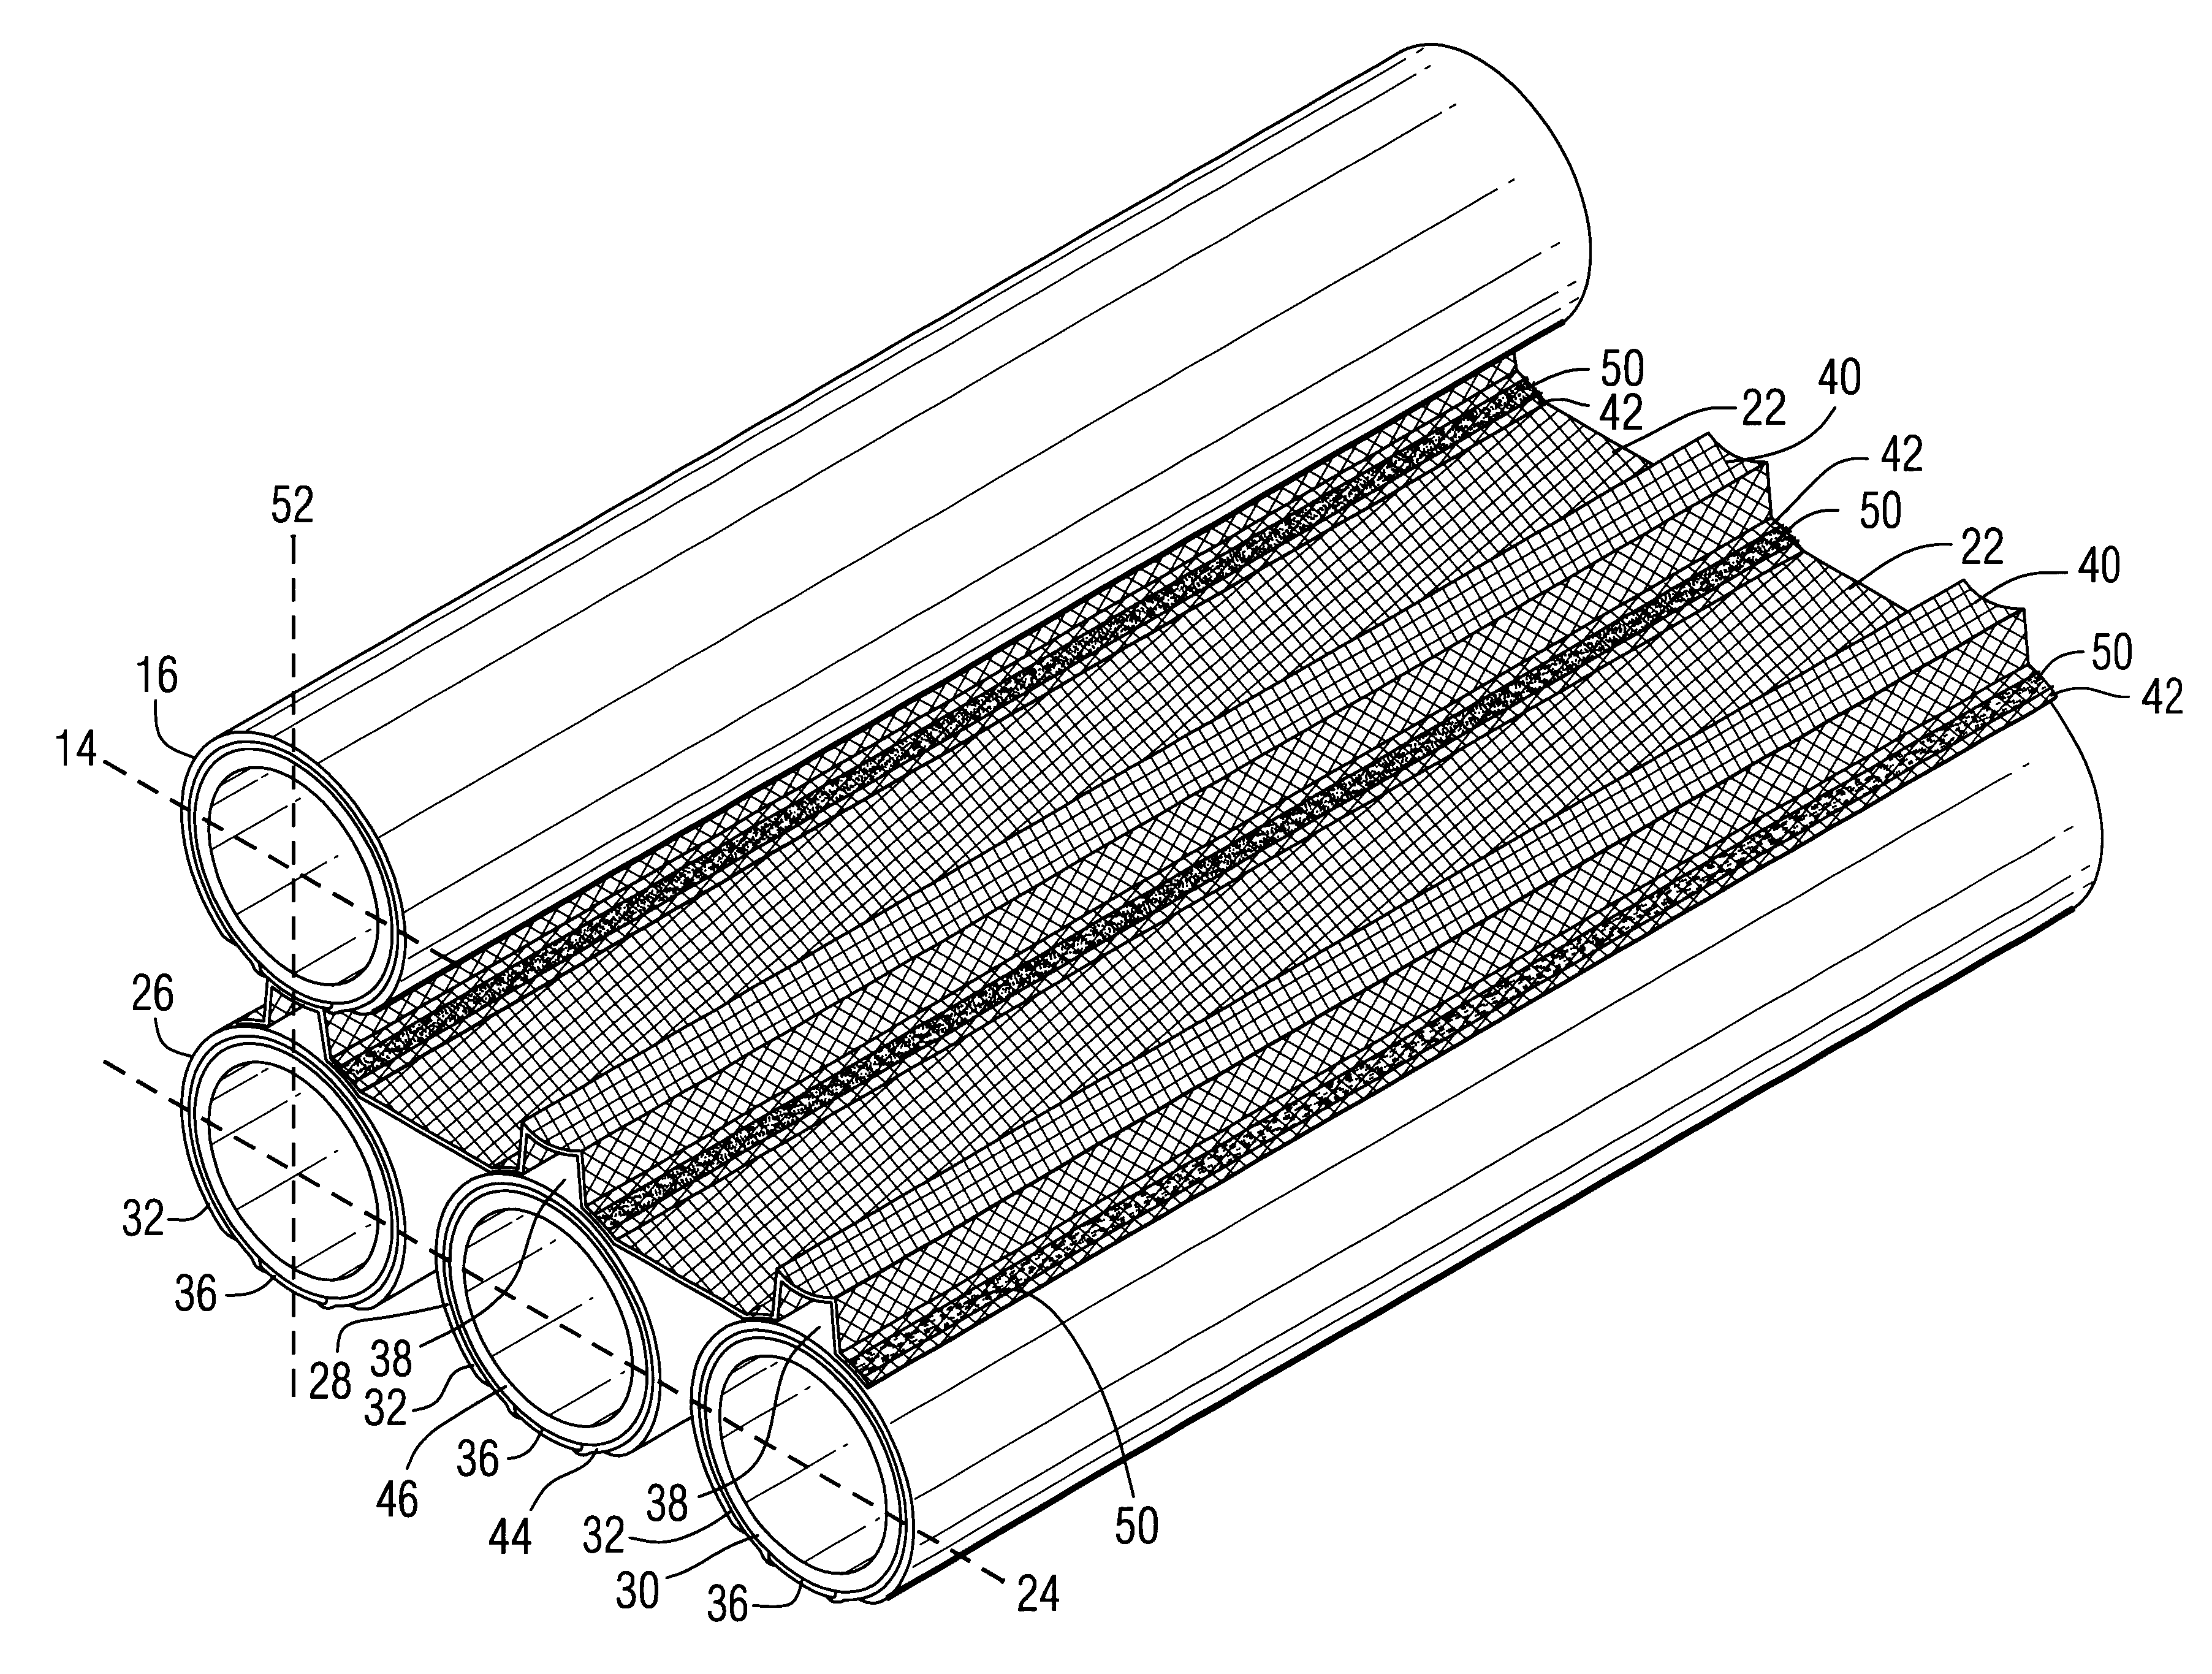 Expanded nickel screen electrical connection supports for solid oxide fuel cells